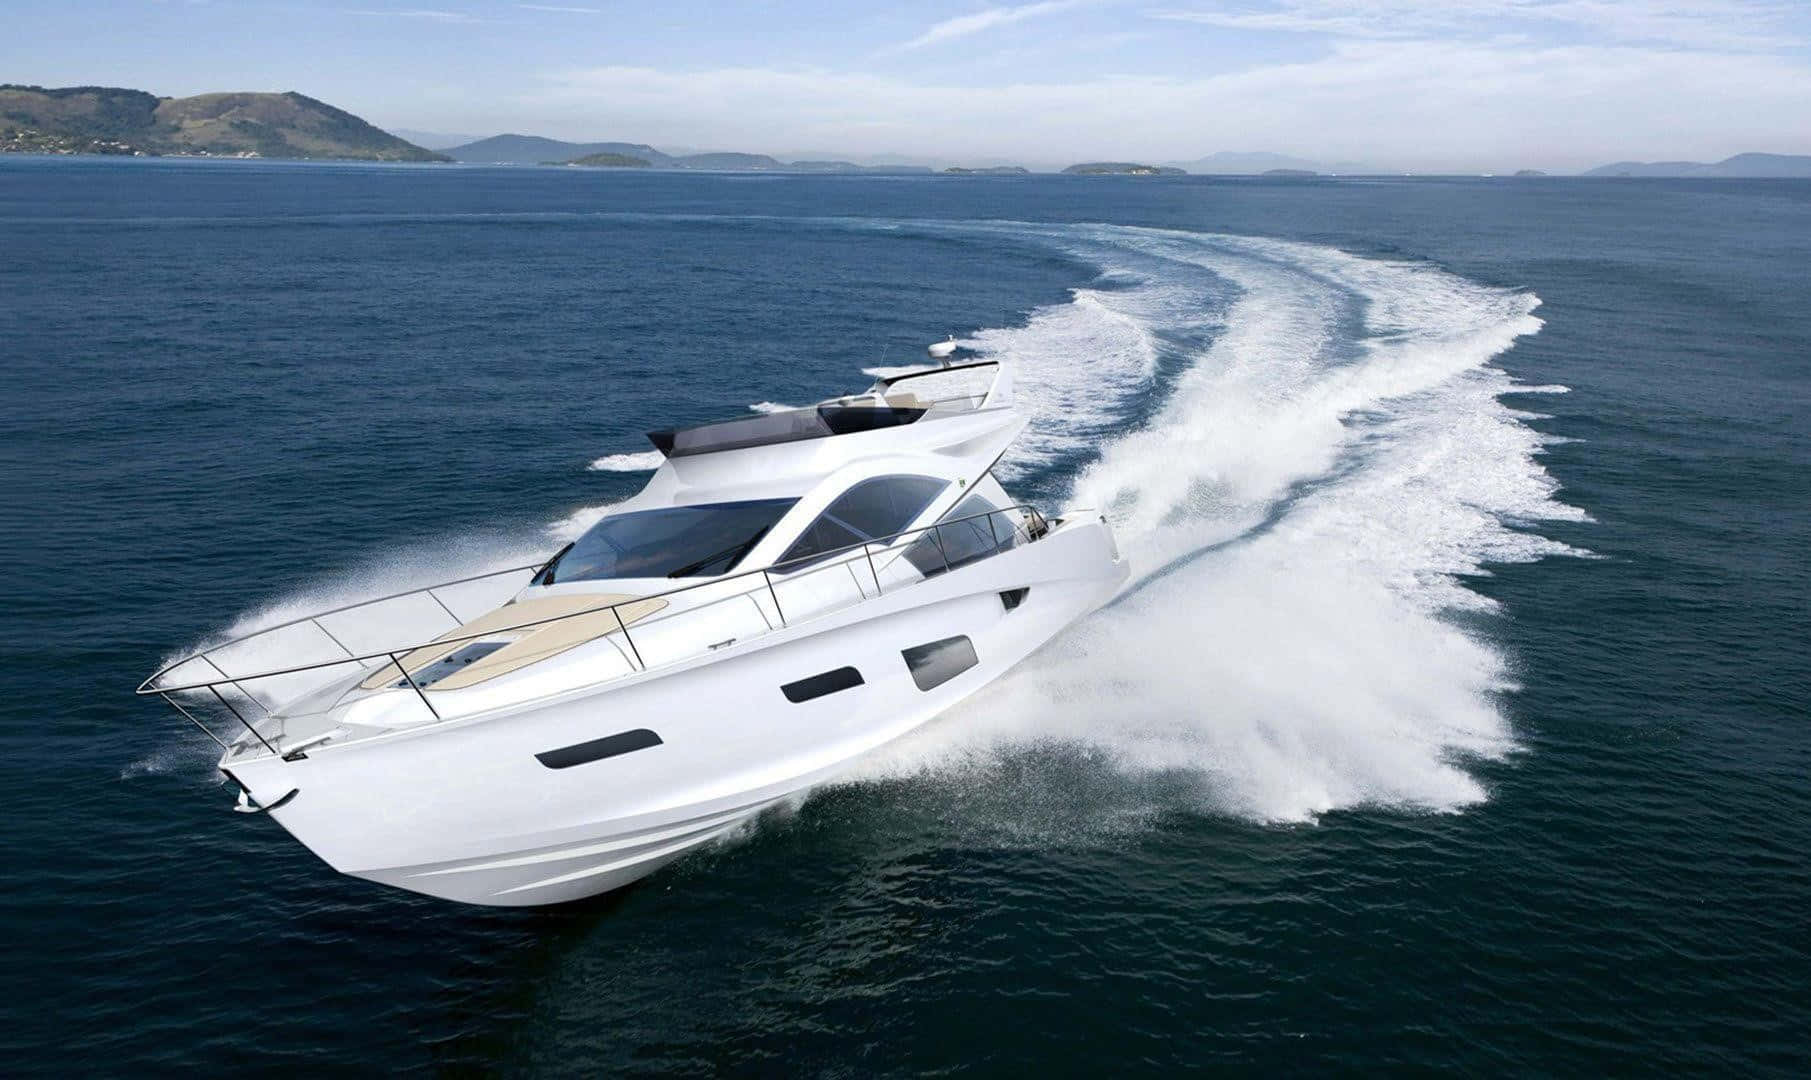 Cruise the Deep Blue in luxury with this Stunning Yacht